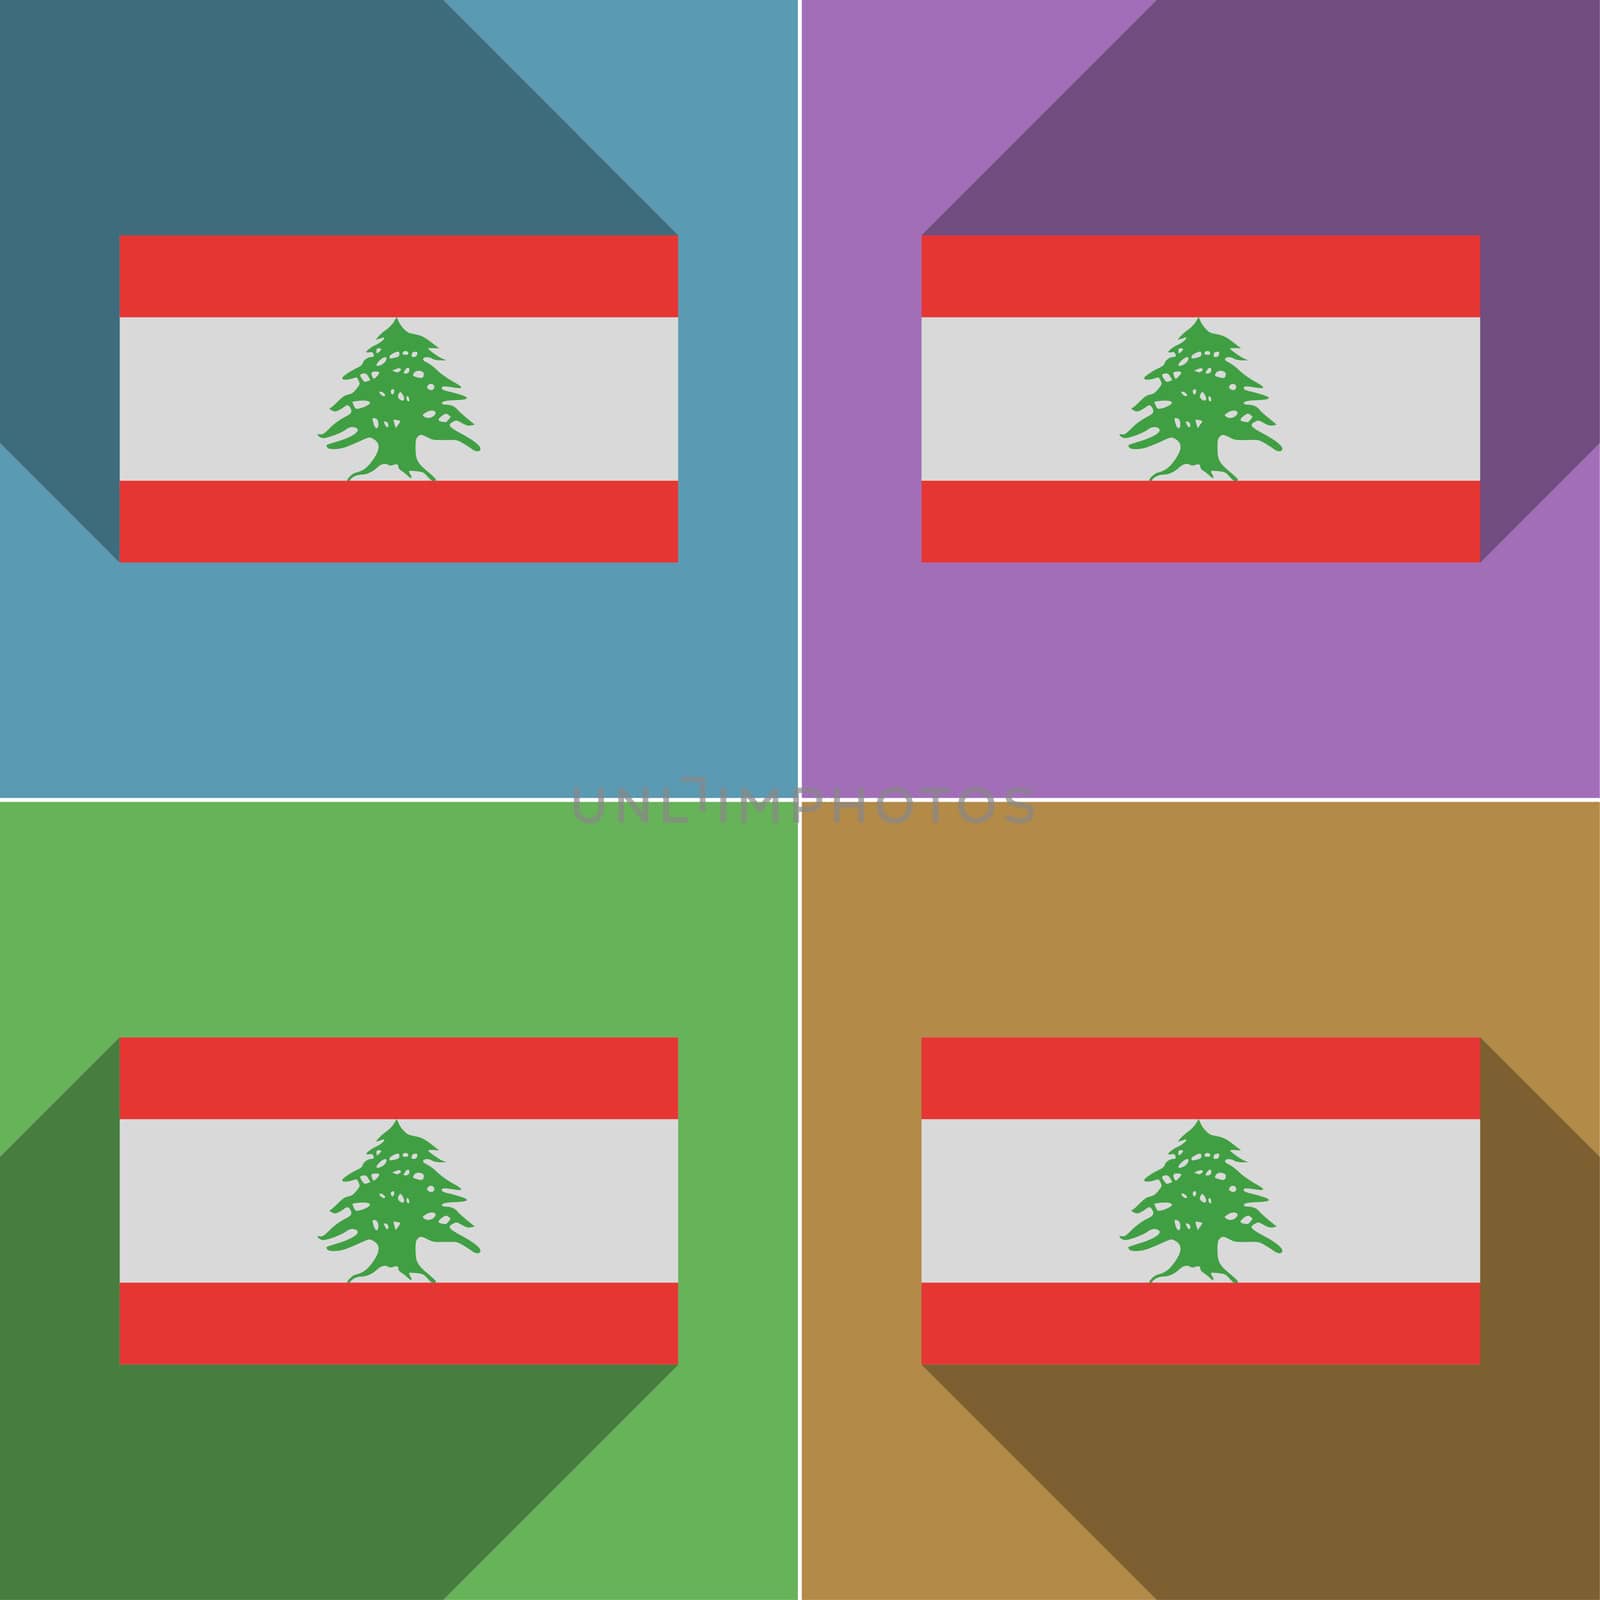 Flags of Lebanon. Set of colors flat design and long shadows.  illustration